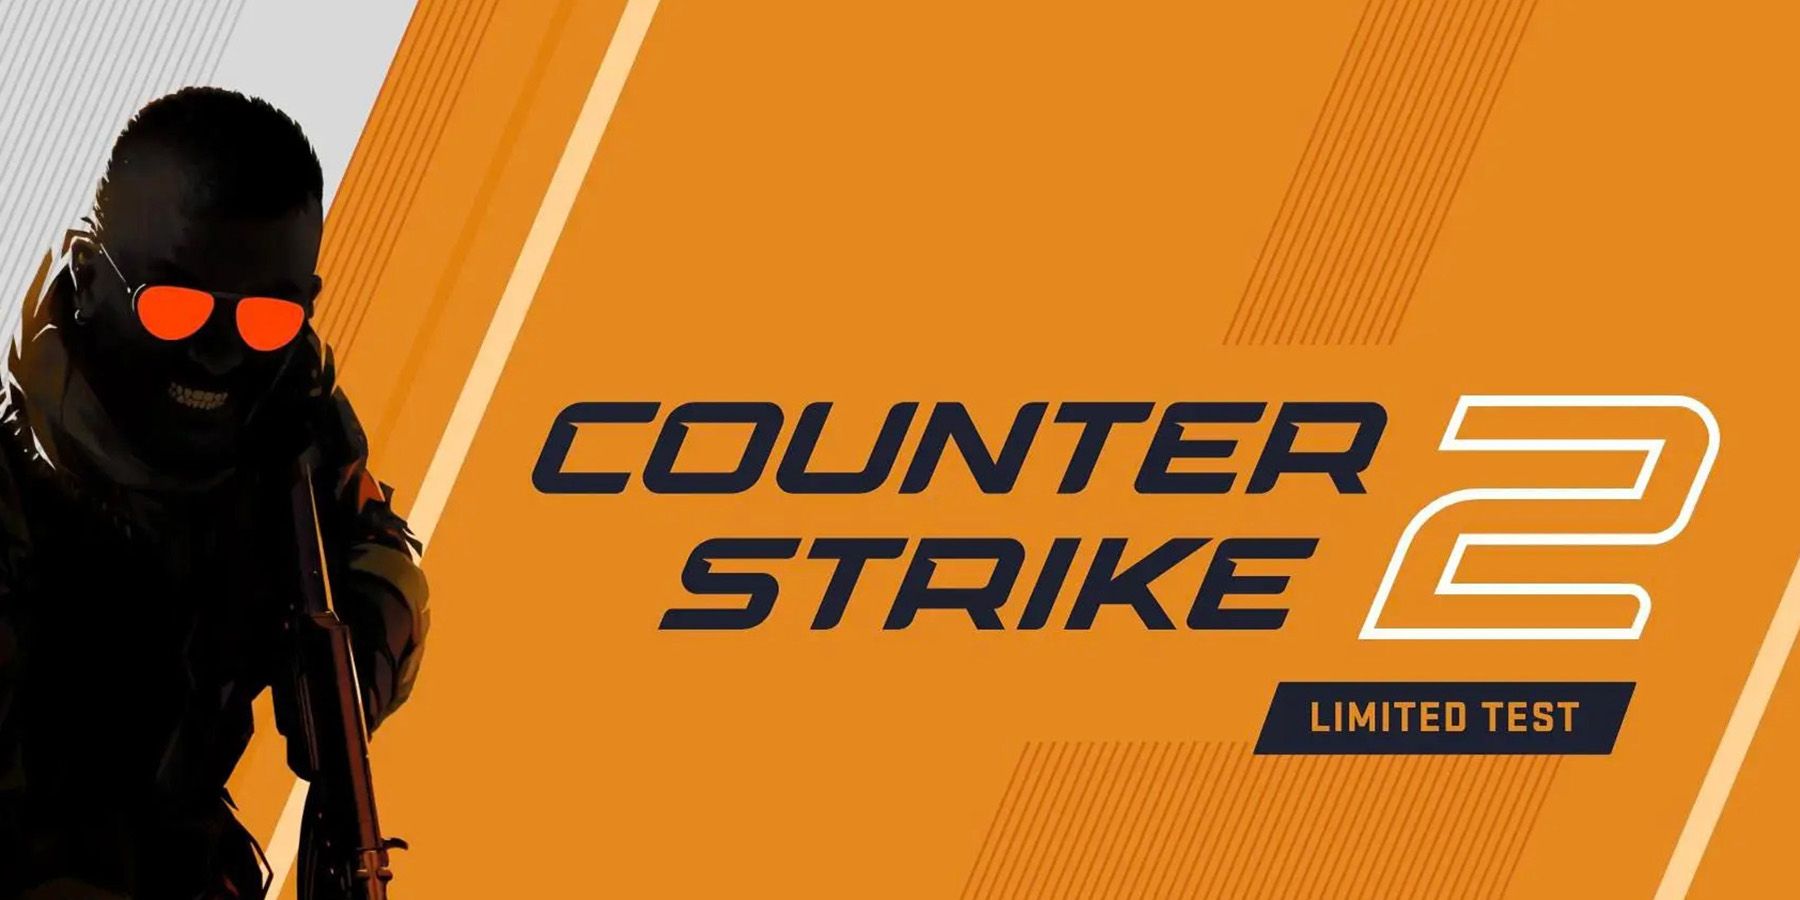 counter-strike-2-limited-test